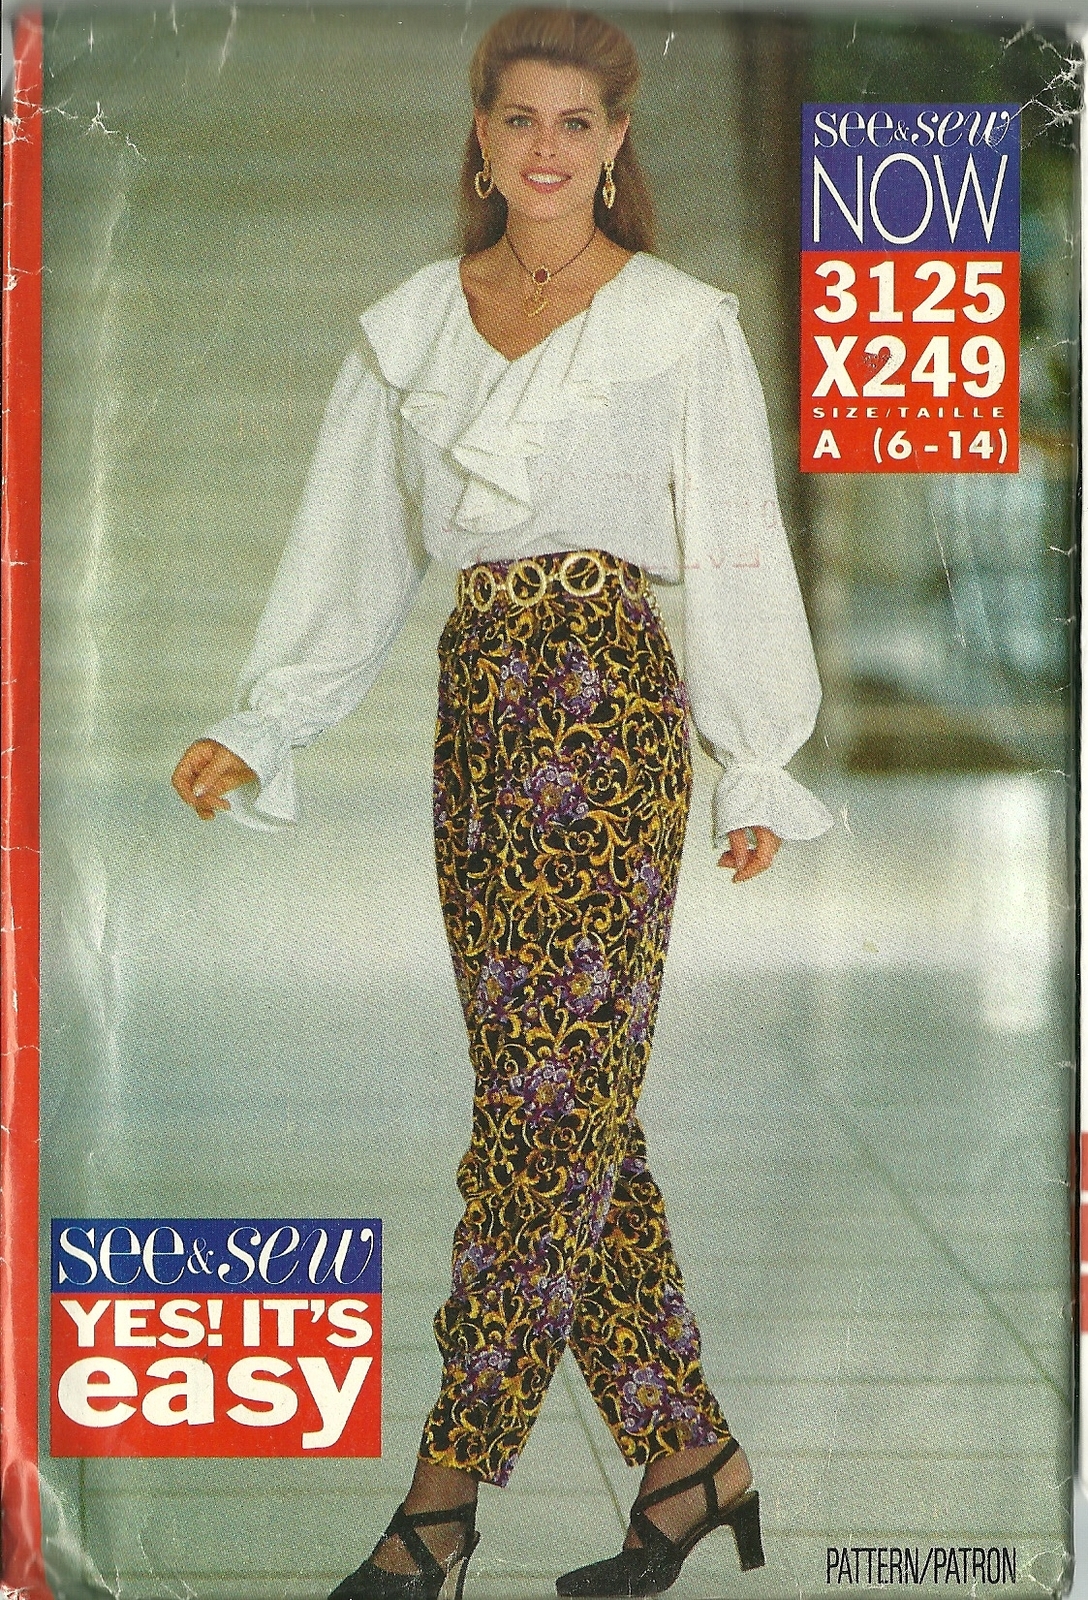 See And Sew Sewing Pattern 3125 X249 Misses Top Blouse Pants 6 8 10 12 14 New - $9.99